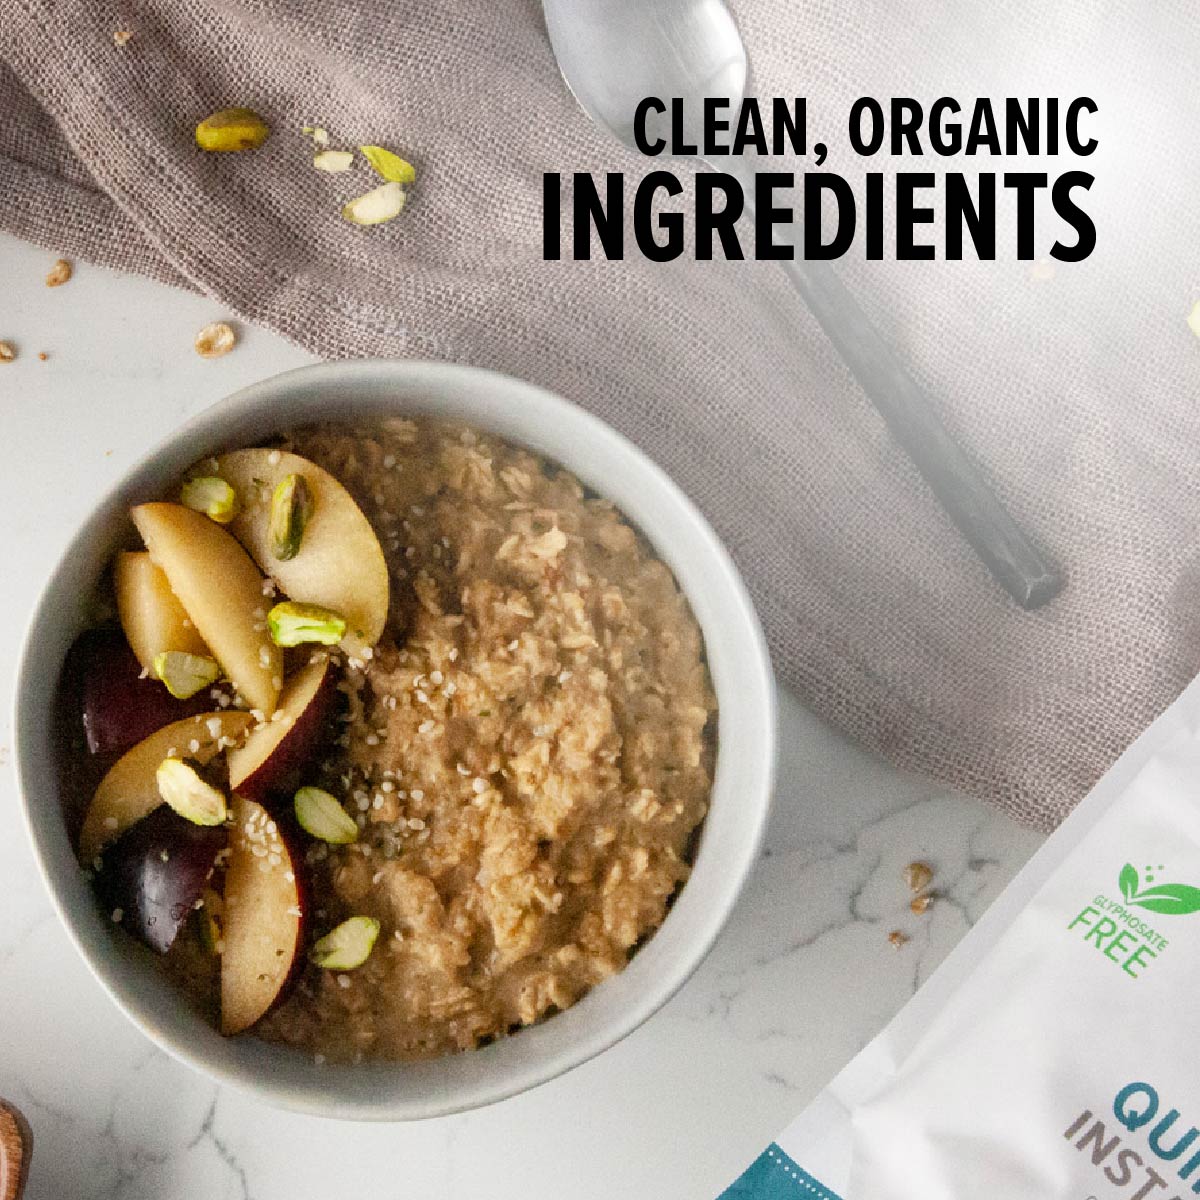 Sprouted Quinoa Hemp Organic Instant Oatmeal